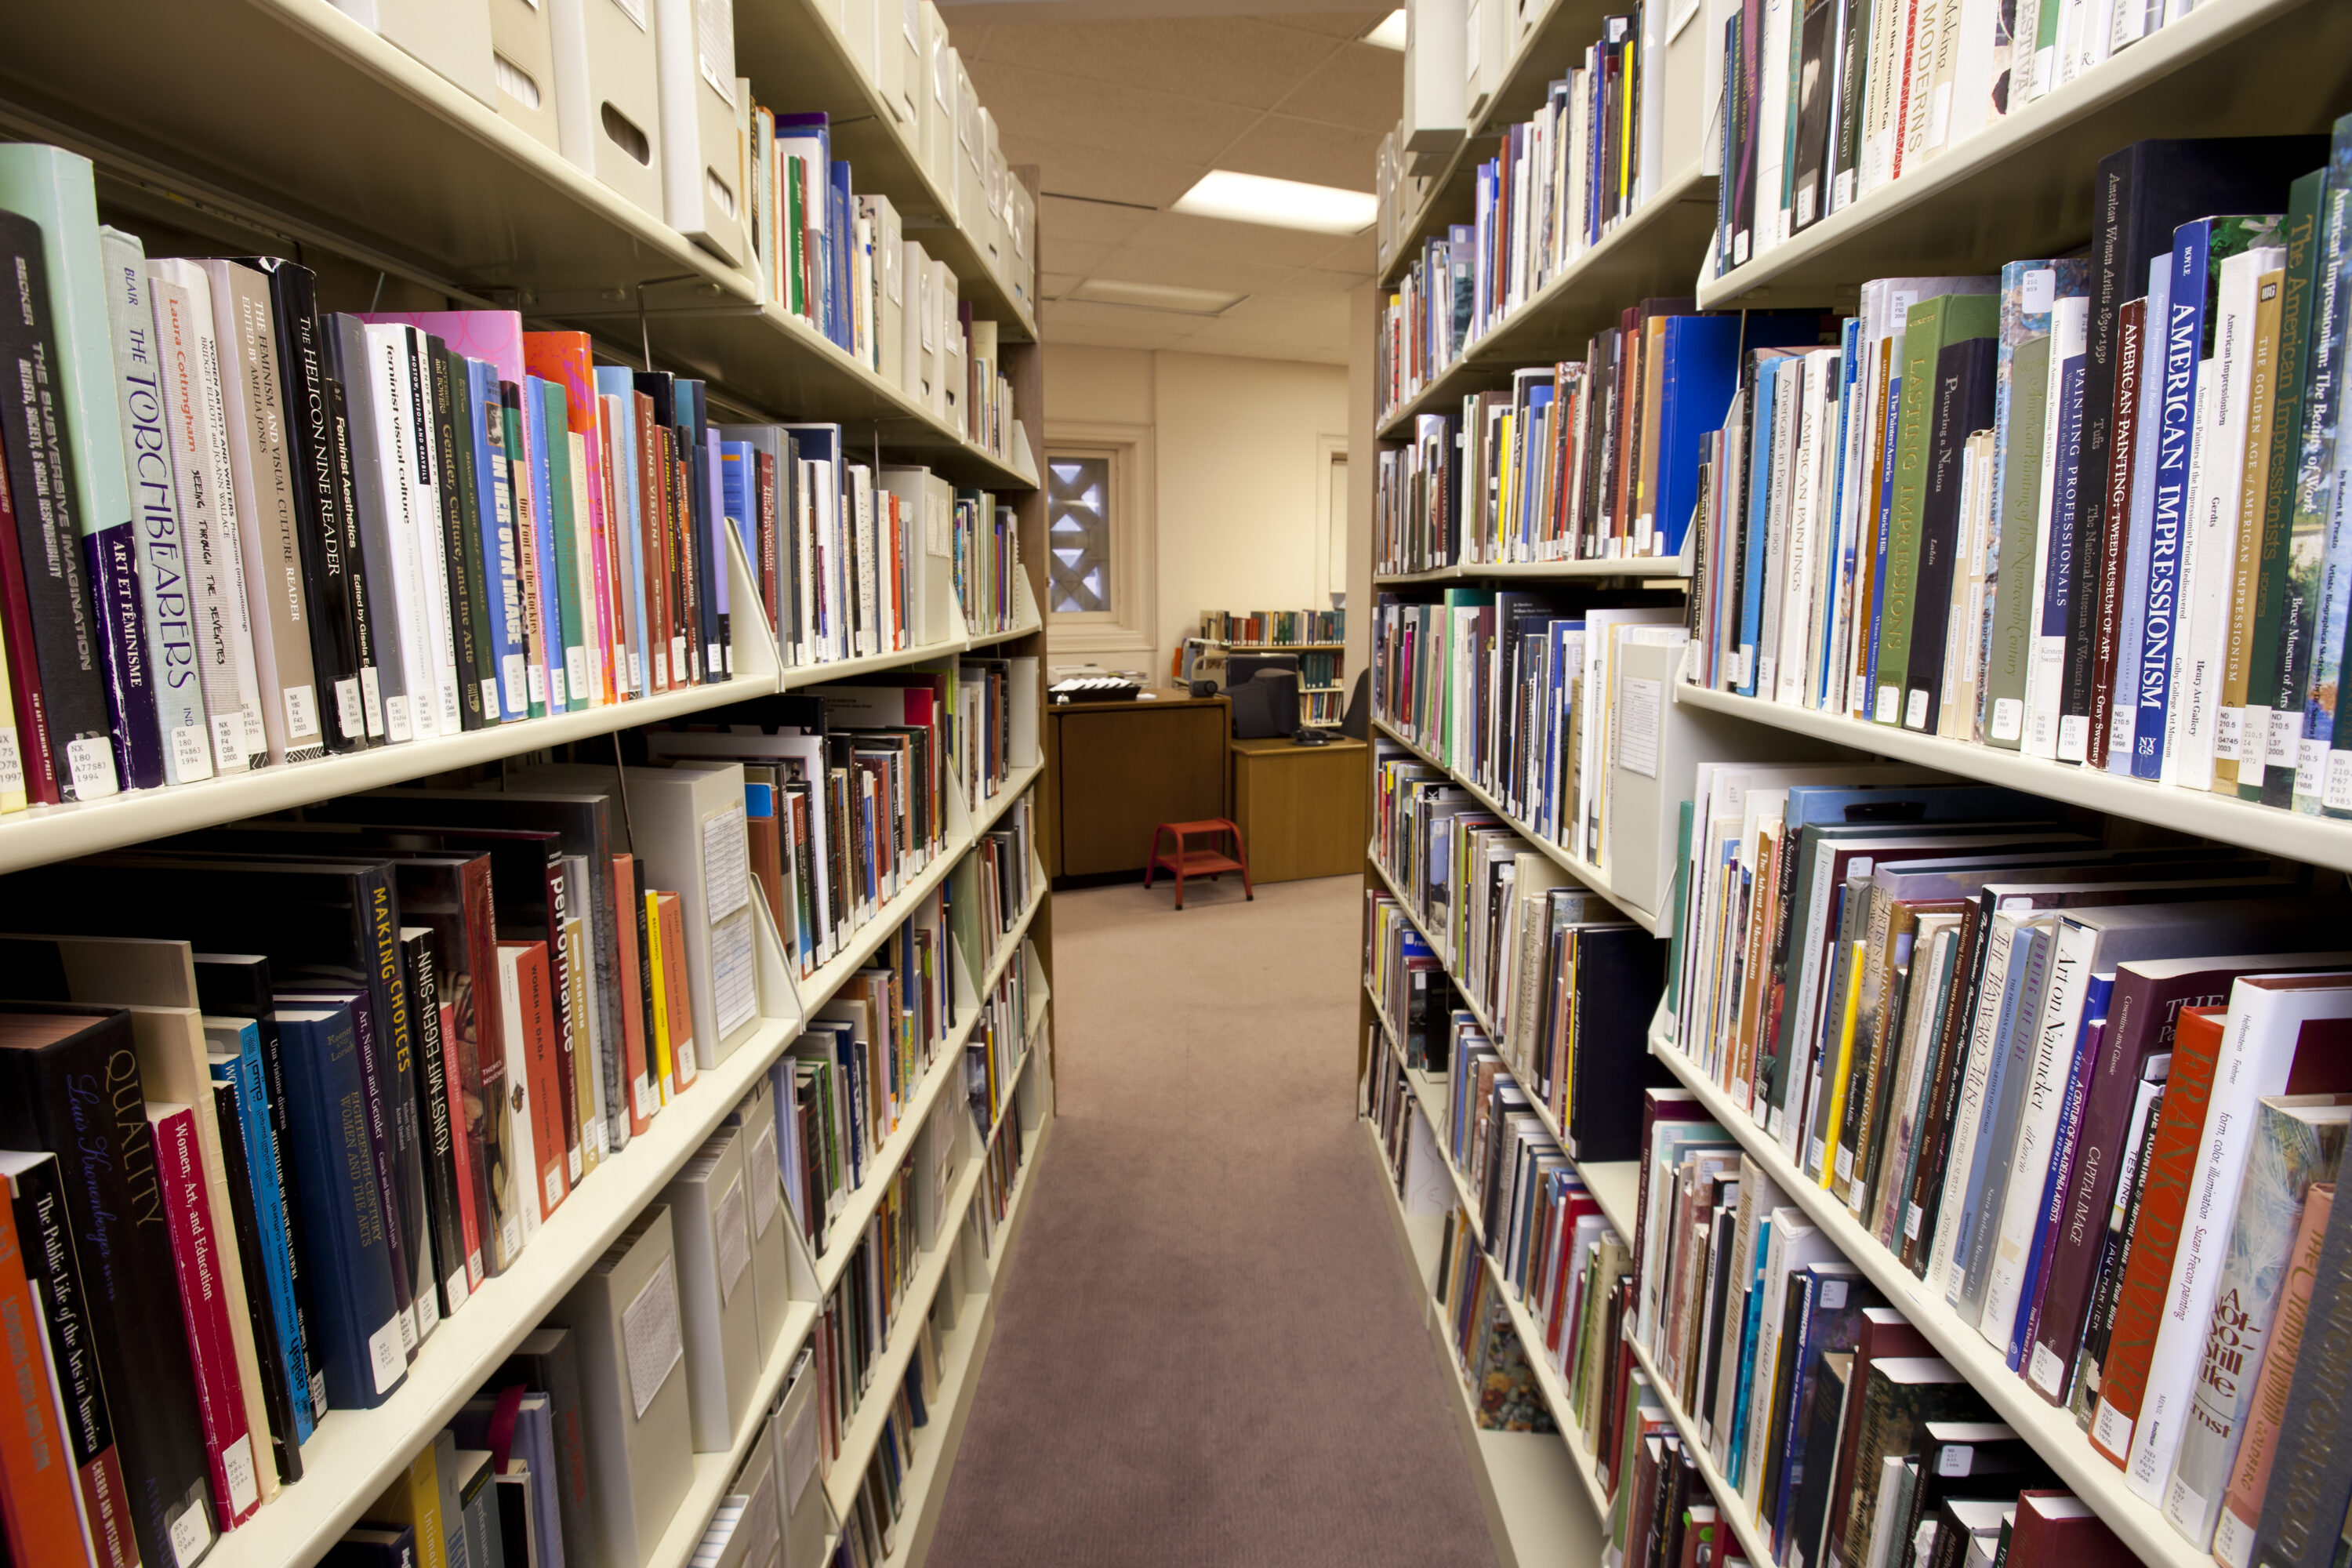 View of an aisle between two tall library bookshelves filled with multi-colored books. At the end of the aisle is a desk with a small orange footstool in front of it and a small bookshelf behind it.